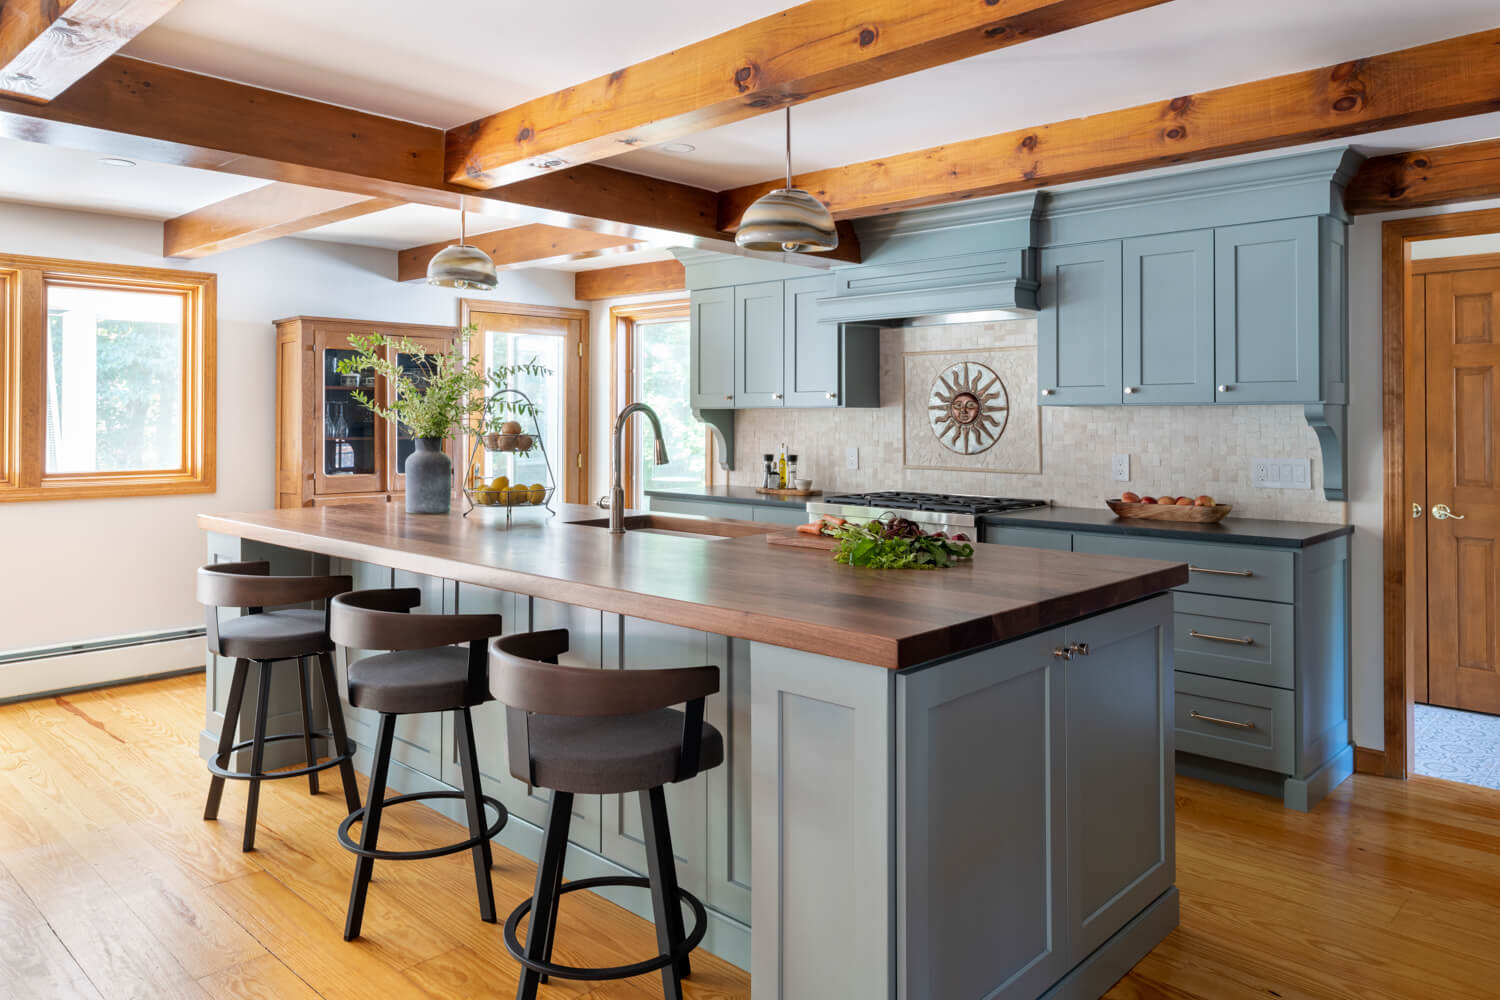 walnut island countertop, blue painted cabinetry, exposed wooden beams